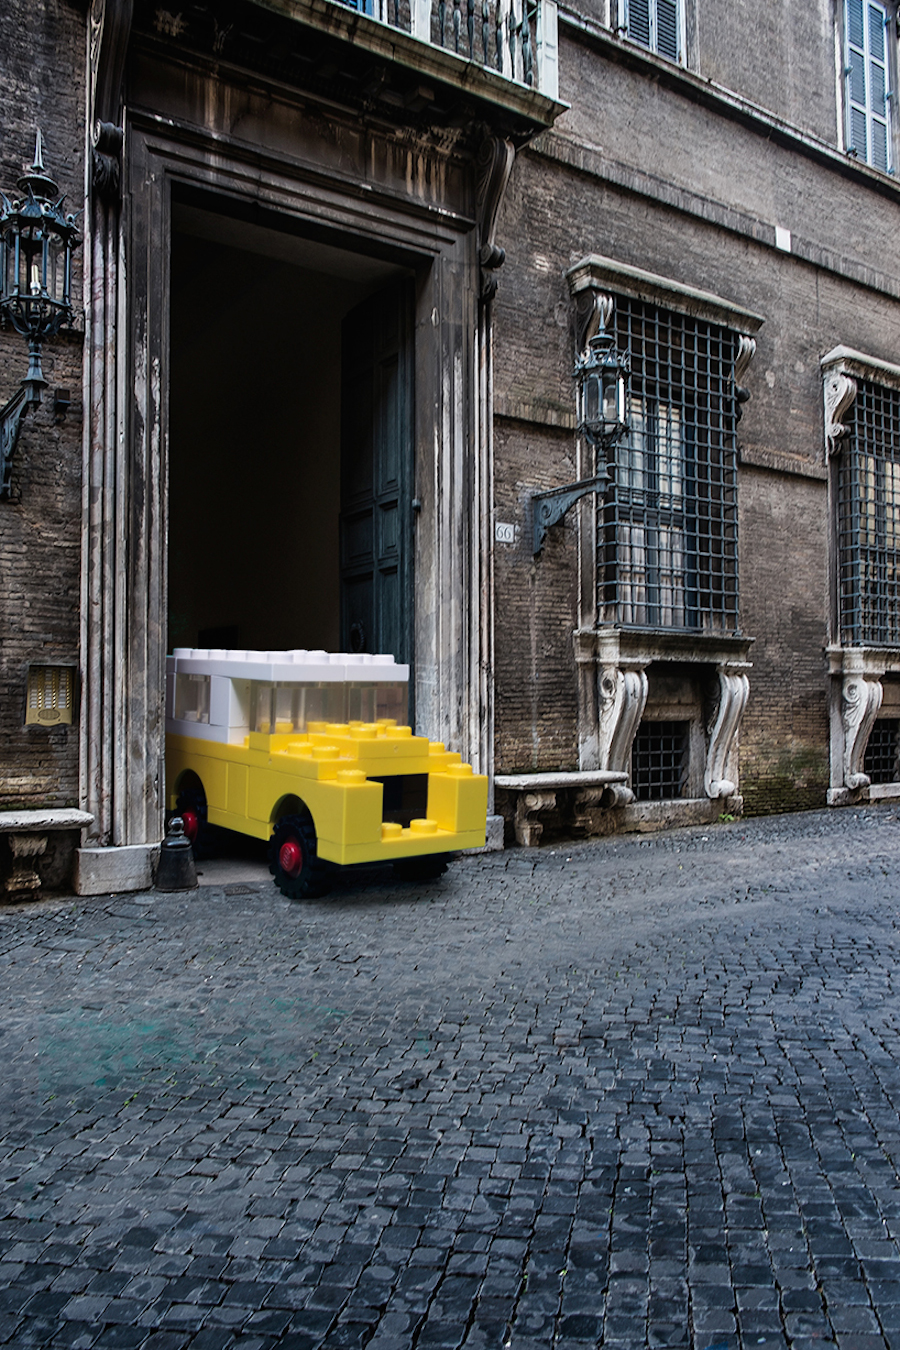 Surrealist Scenes with LEGO Vehicles in the Streets-1